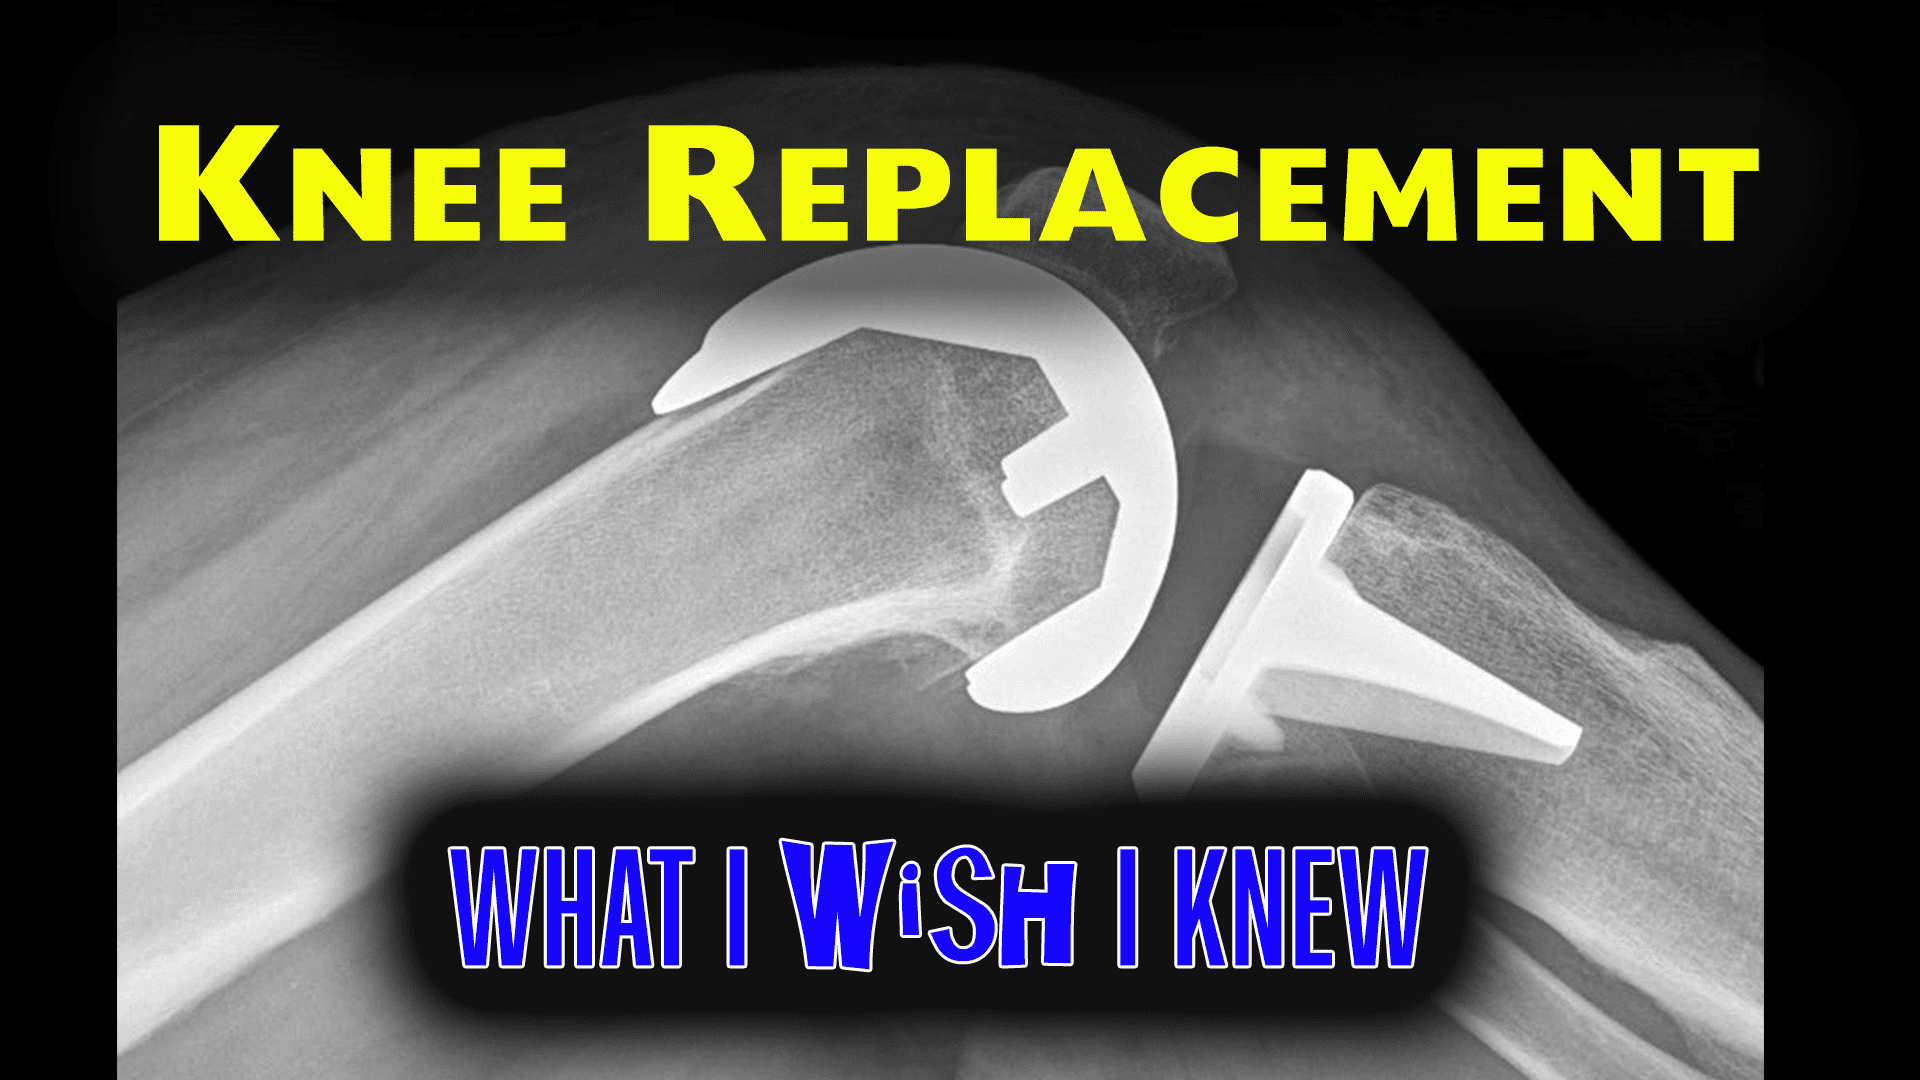 knee X-ray with text overlay, knee replacement: what I wish I knew